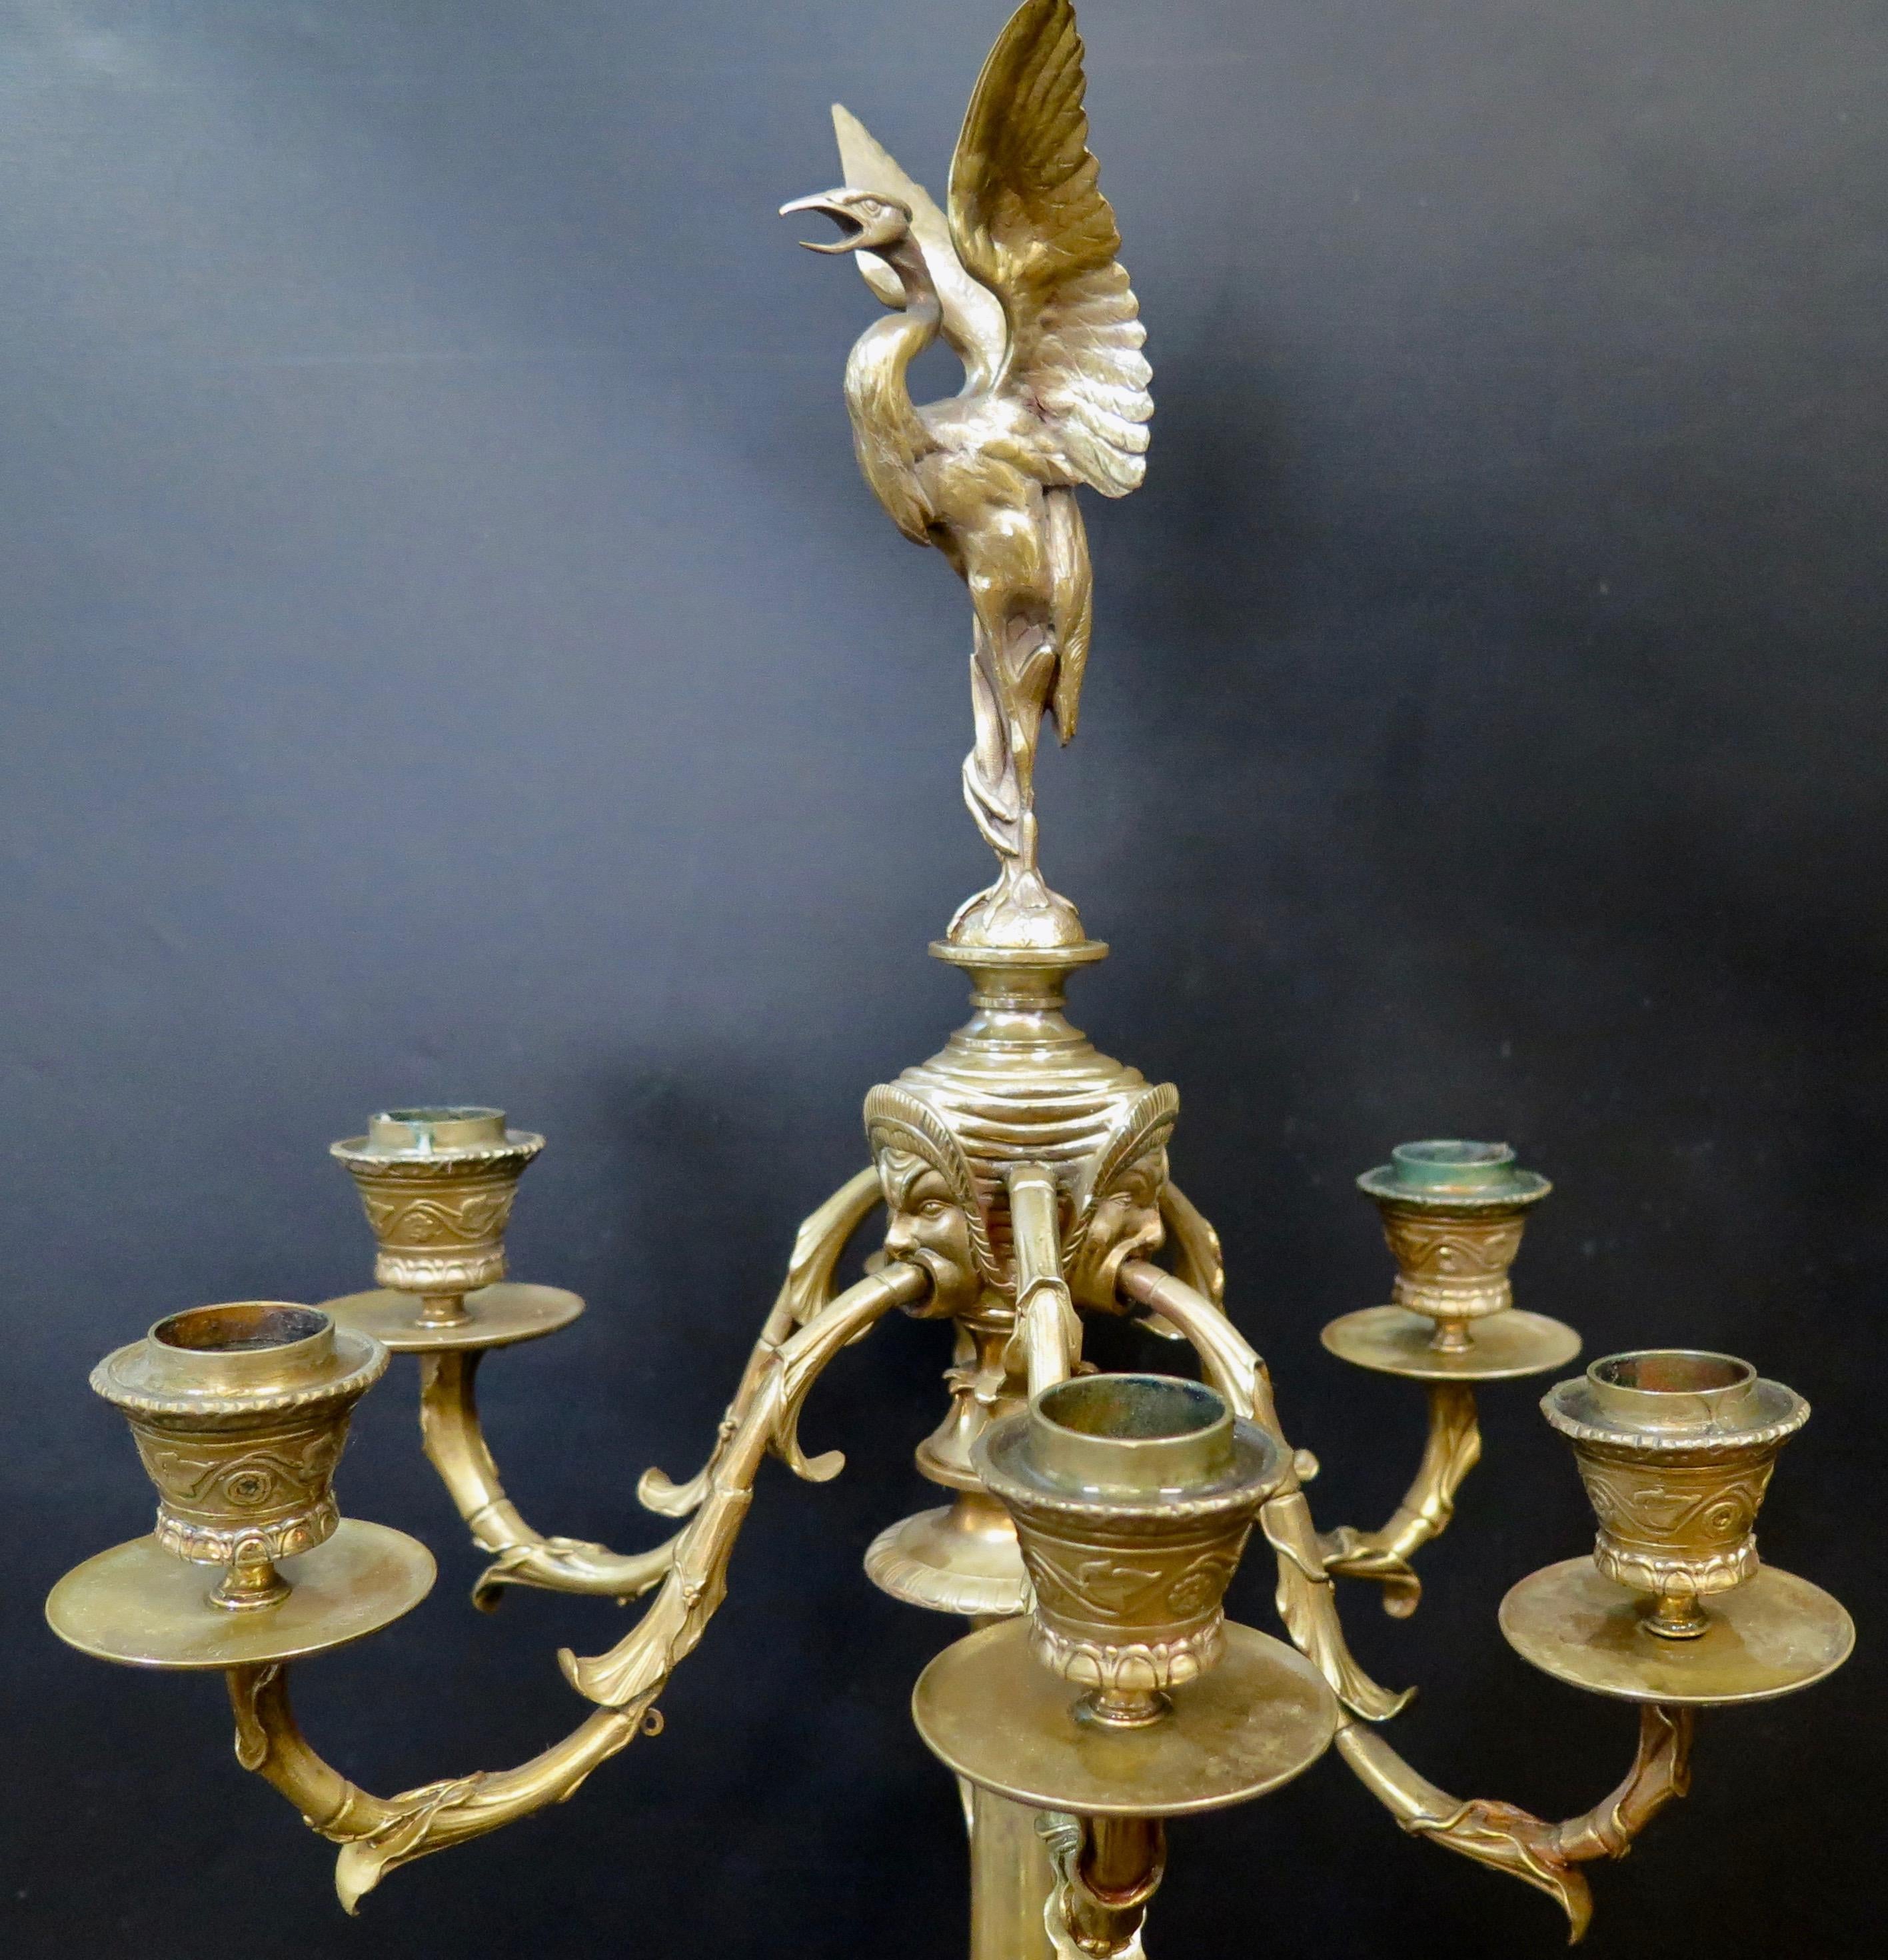 This exceptional high quality pair of French 19th century tall bronze candelabra are magnificently sculpted. A figural mythological animal tripod base holds a tall bamboo stem flowing upward. Six decorative extended curved arms terminate in candle